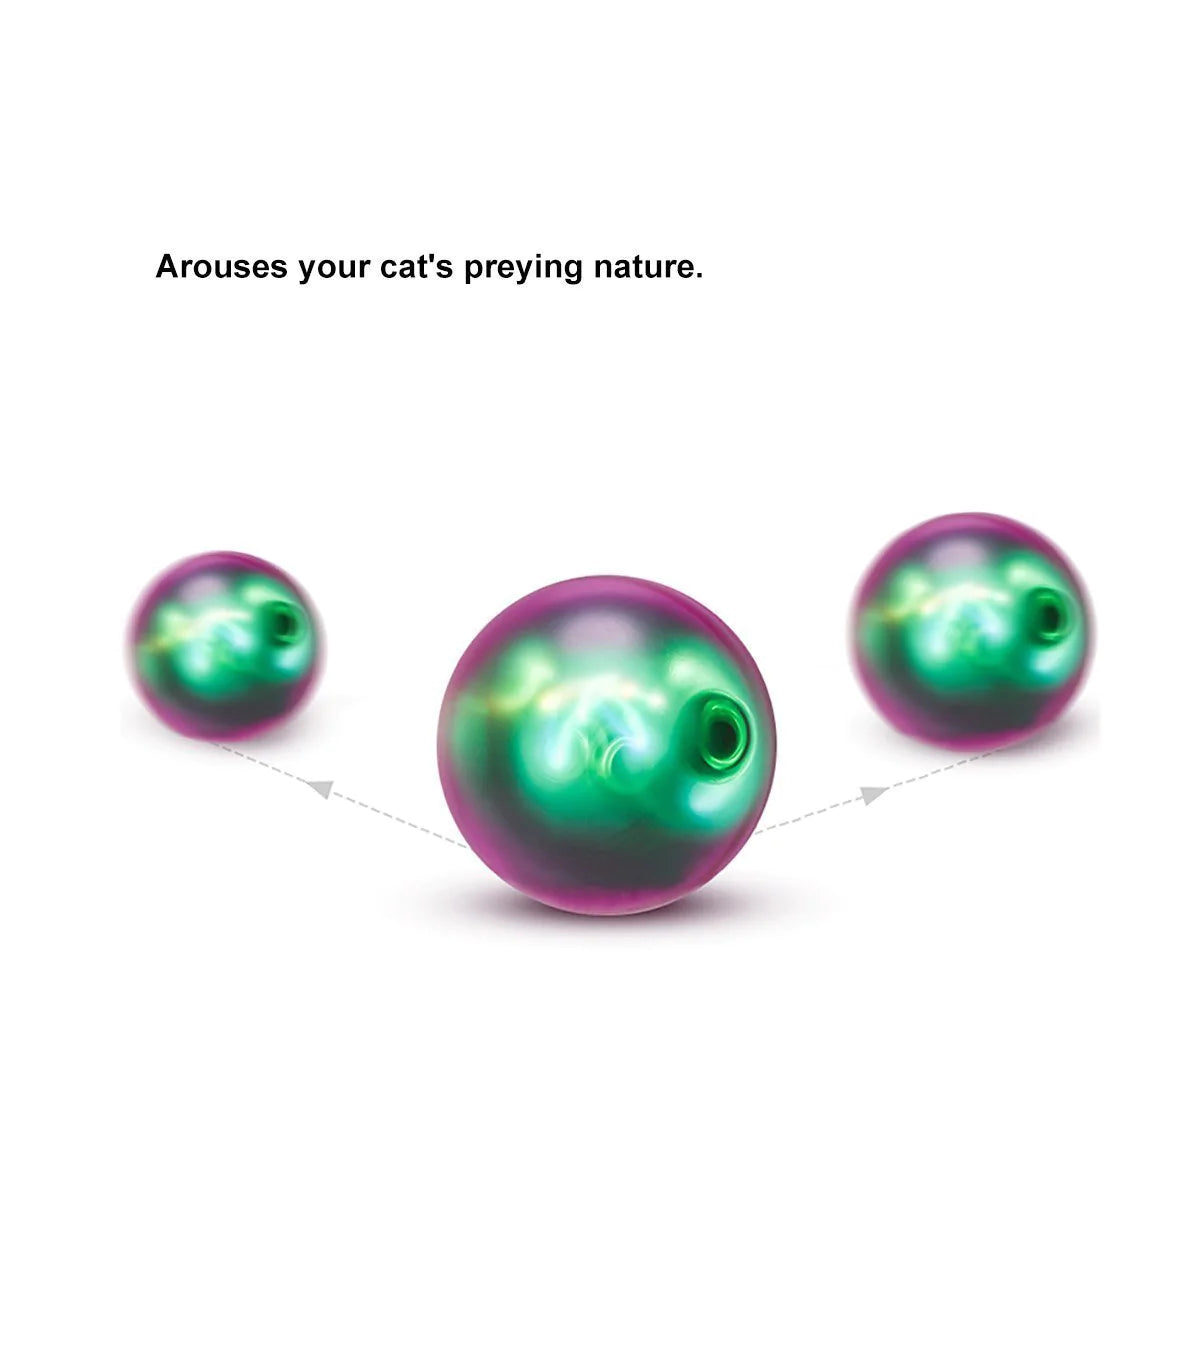 pidan "Dodging Ball" Electronic Cat Interactive Toy